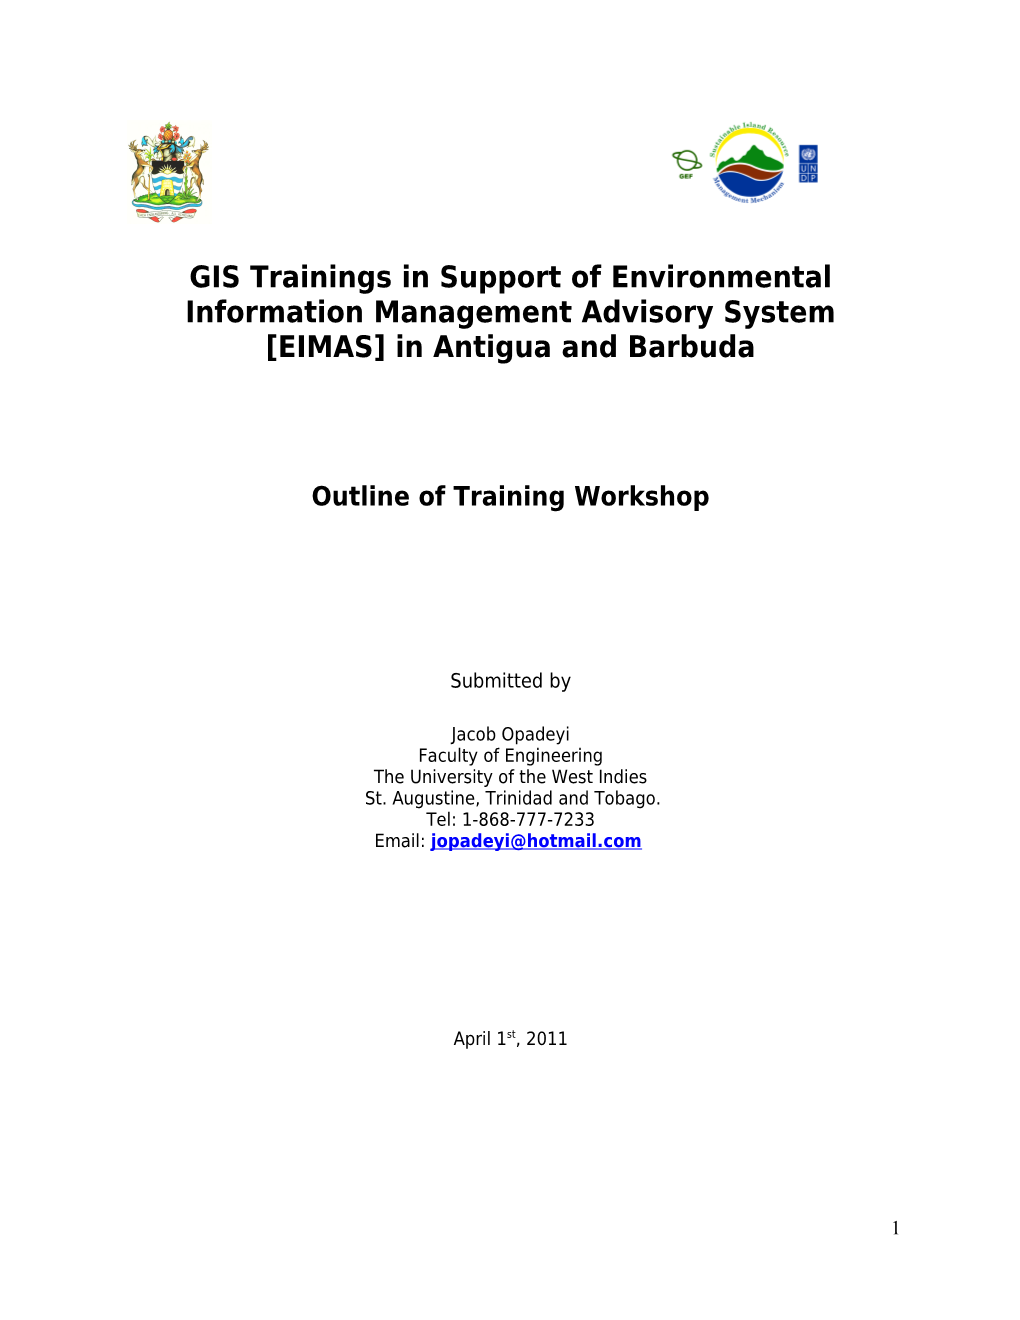 GIS Trainings in Support of Environmental Information Management Advisory System EIMAS